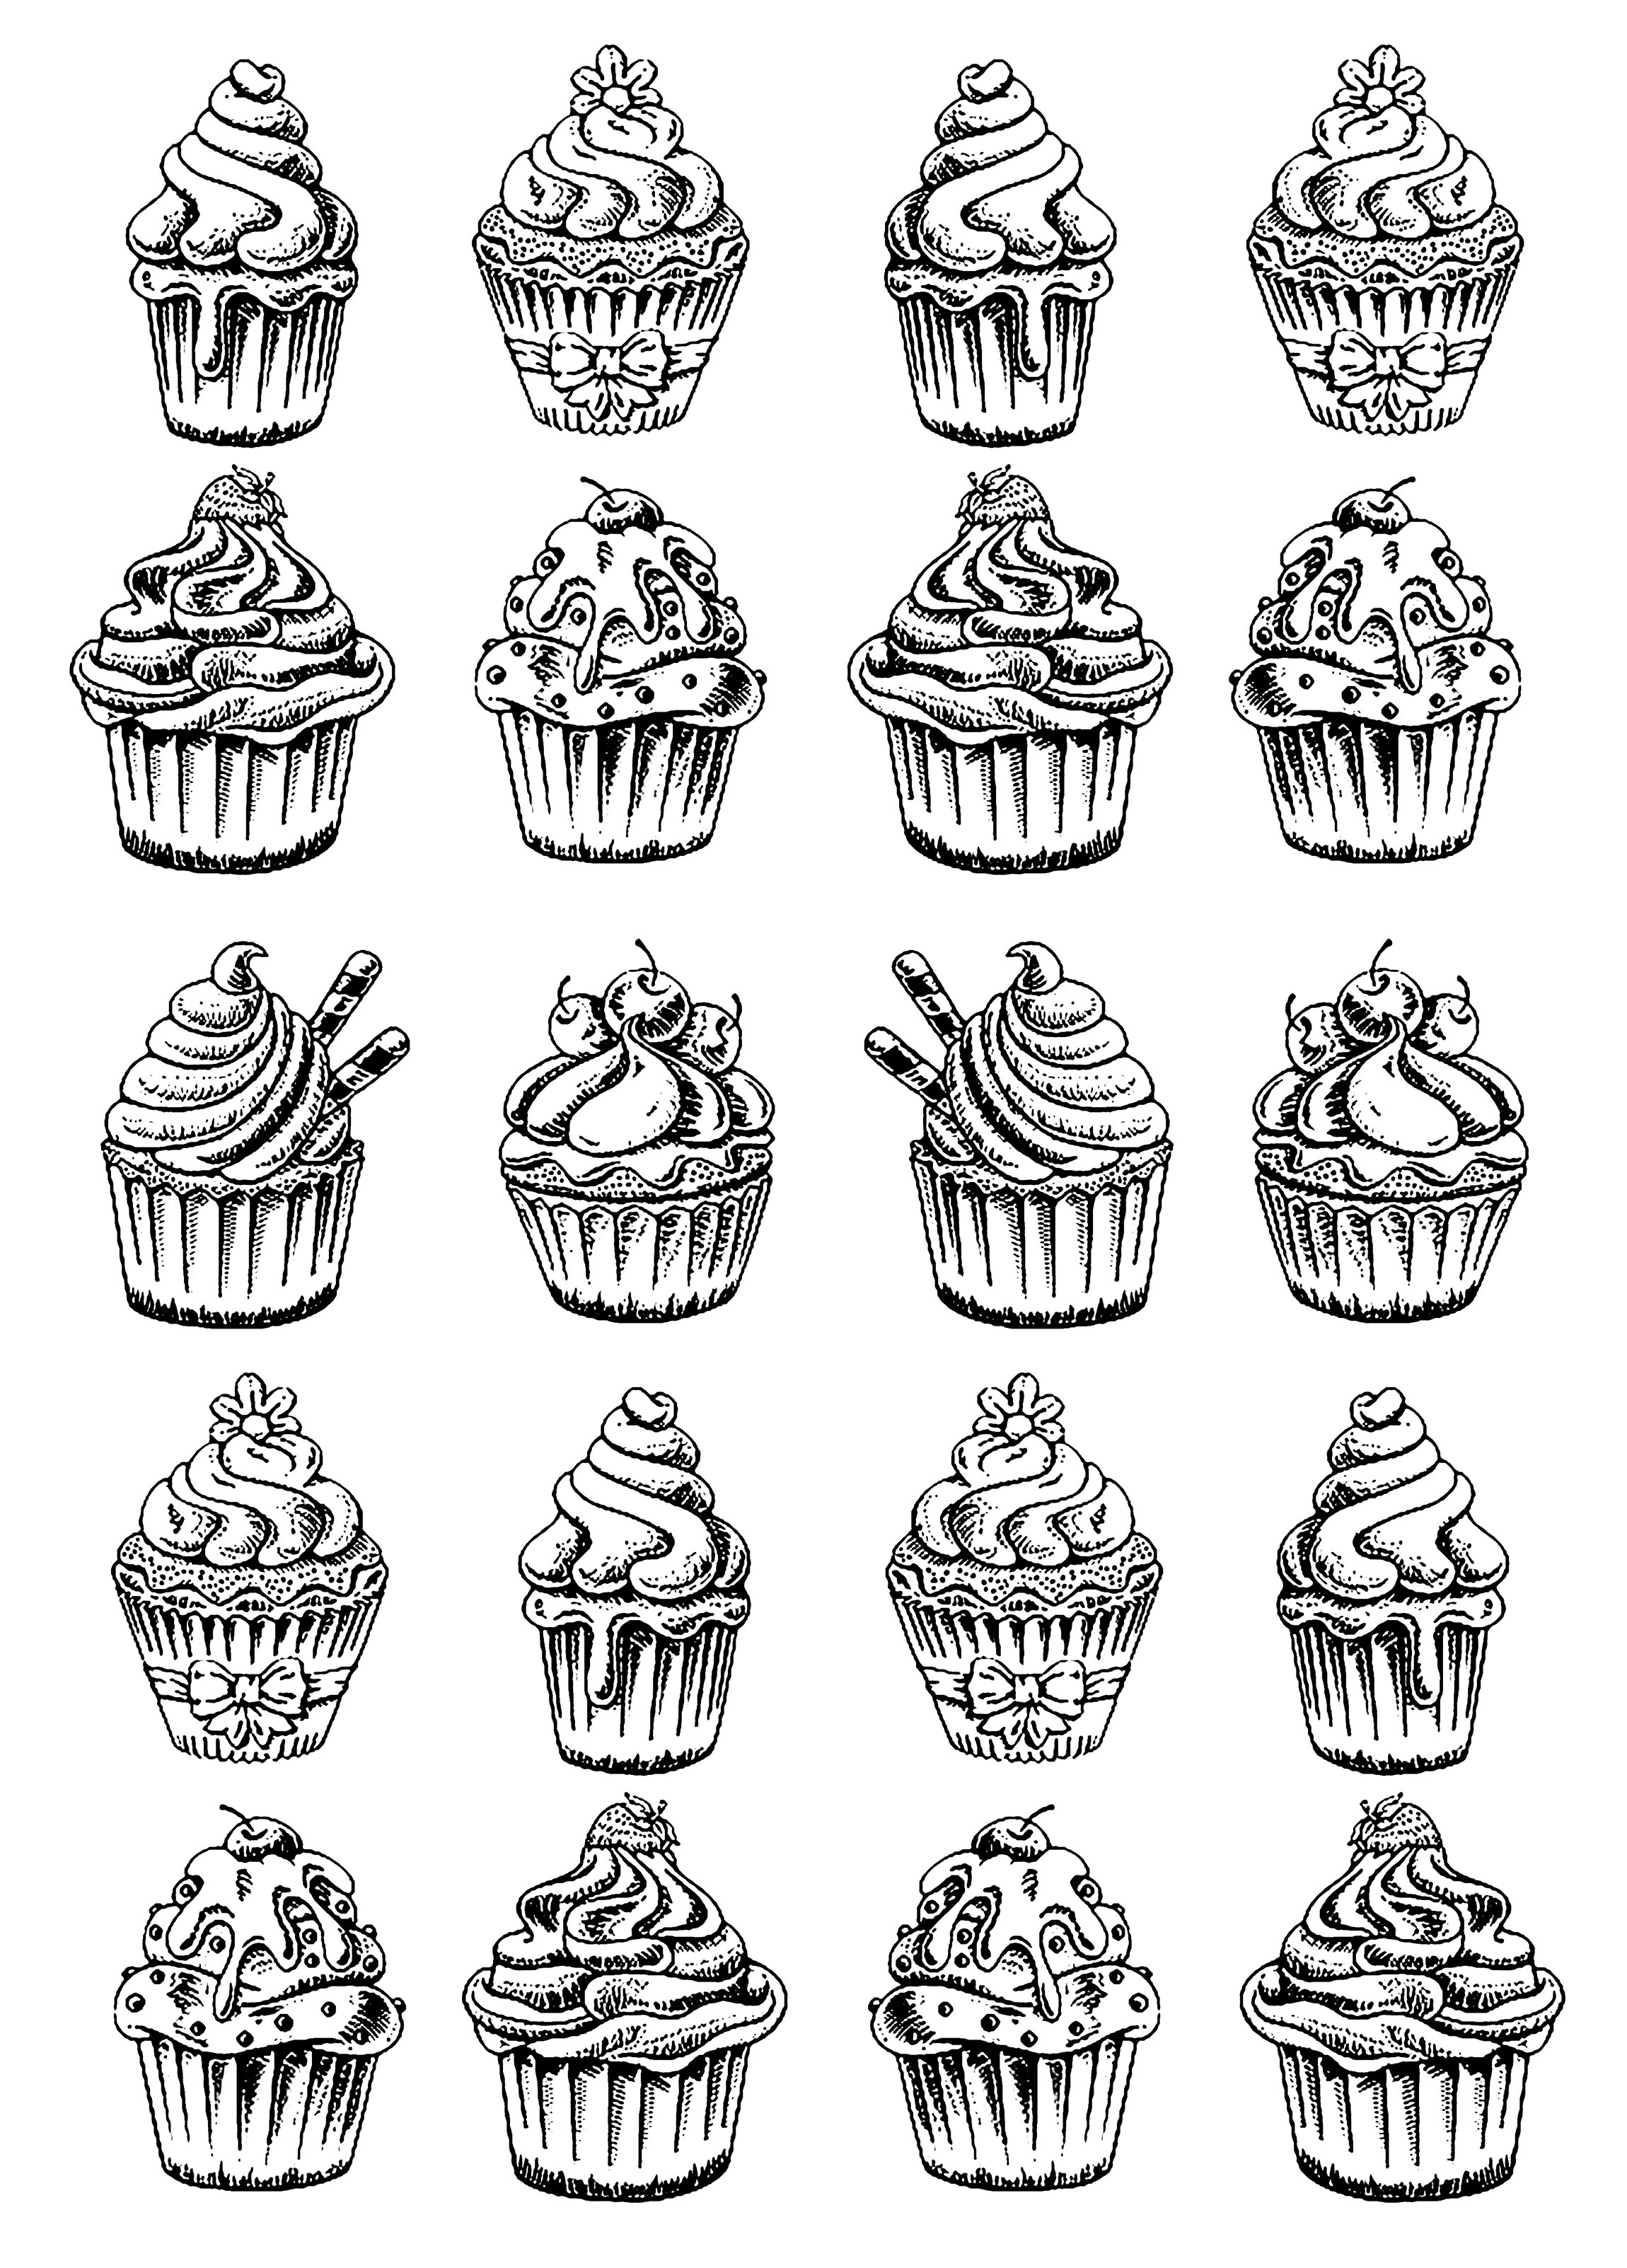 Download Twenty good cupcakes - Cupcakes Adult Coloring Pages